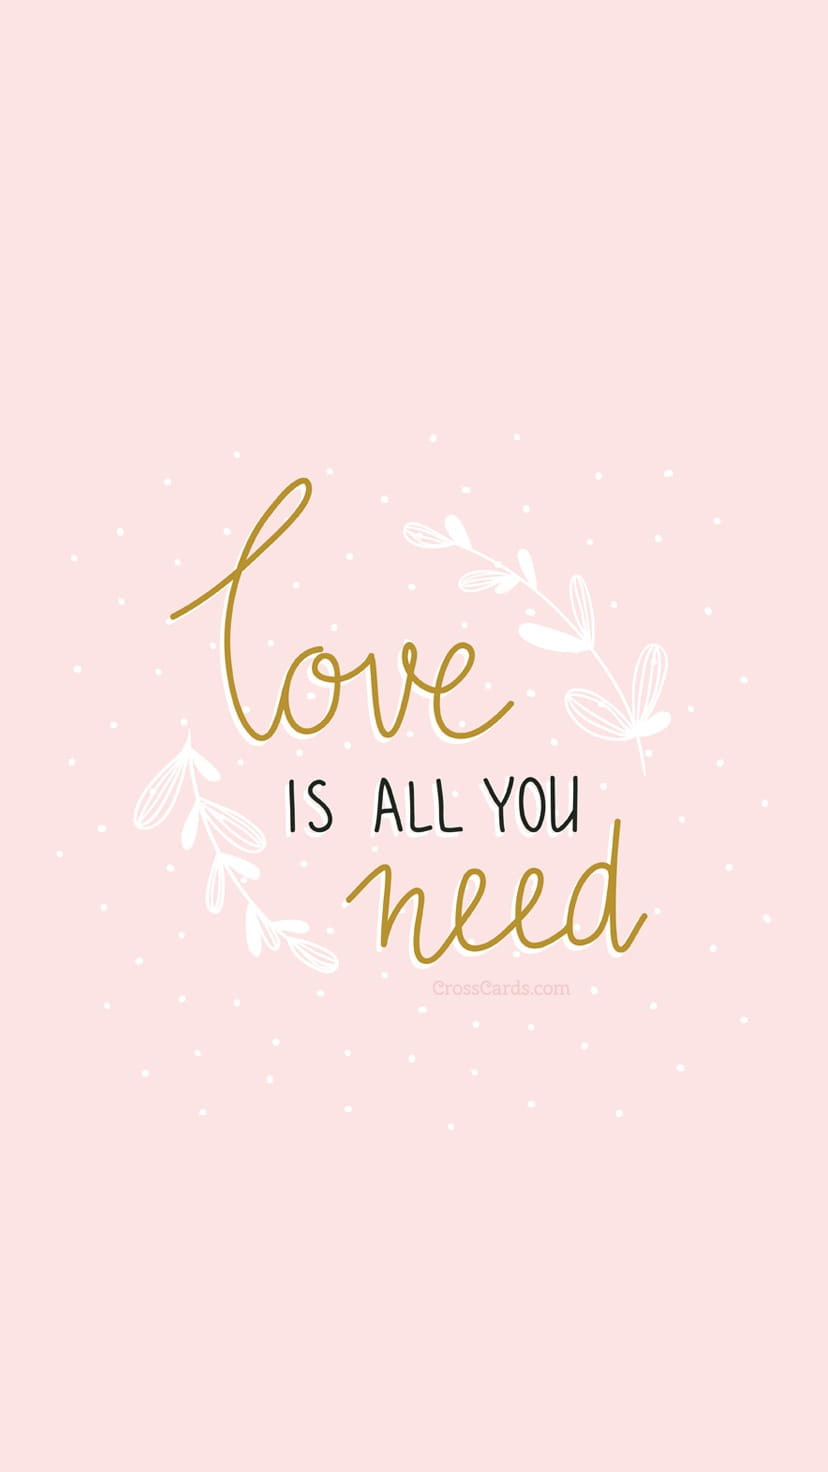 February 2017 - Love is all you need